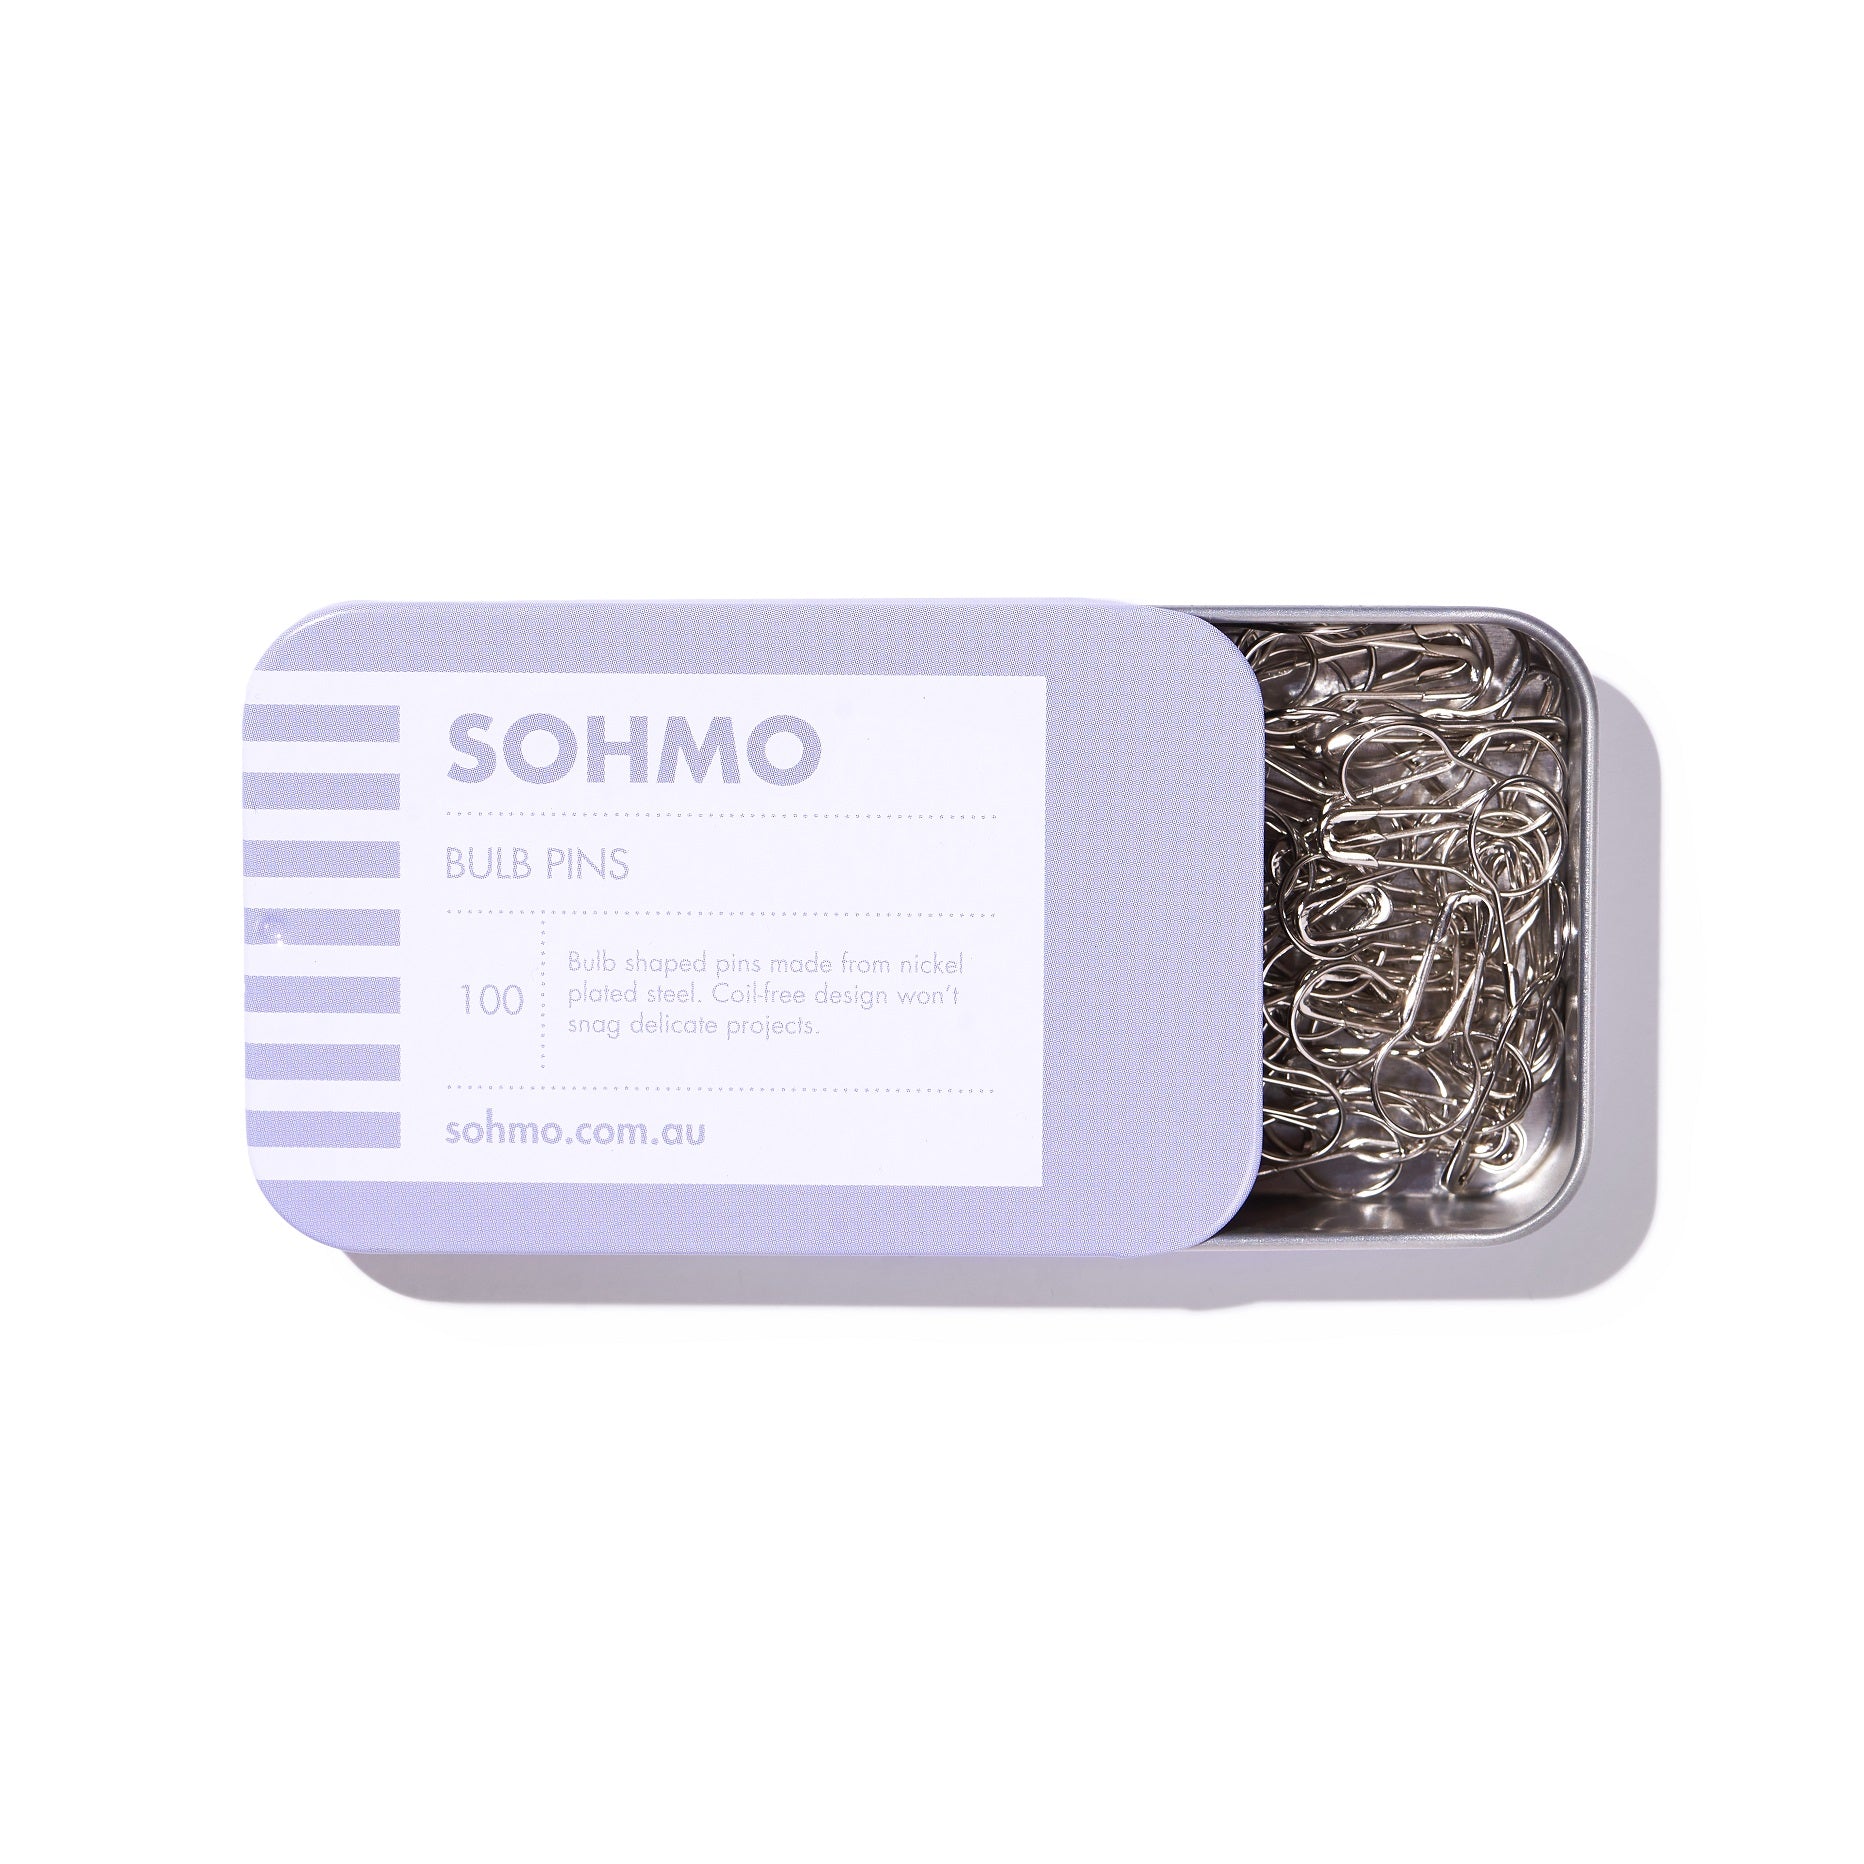 SOHMO Bulb pins in purple tin for knitting markers